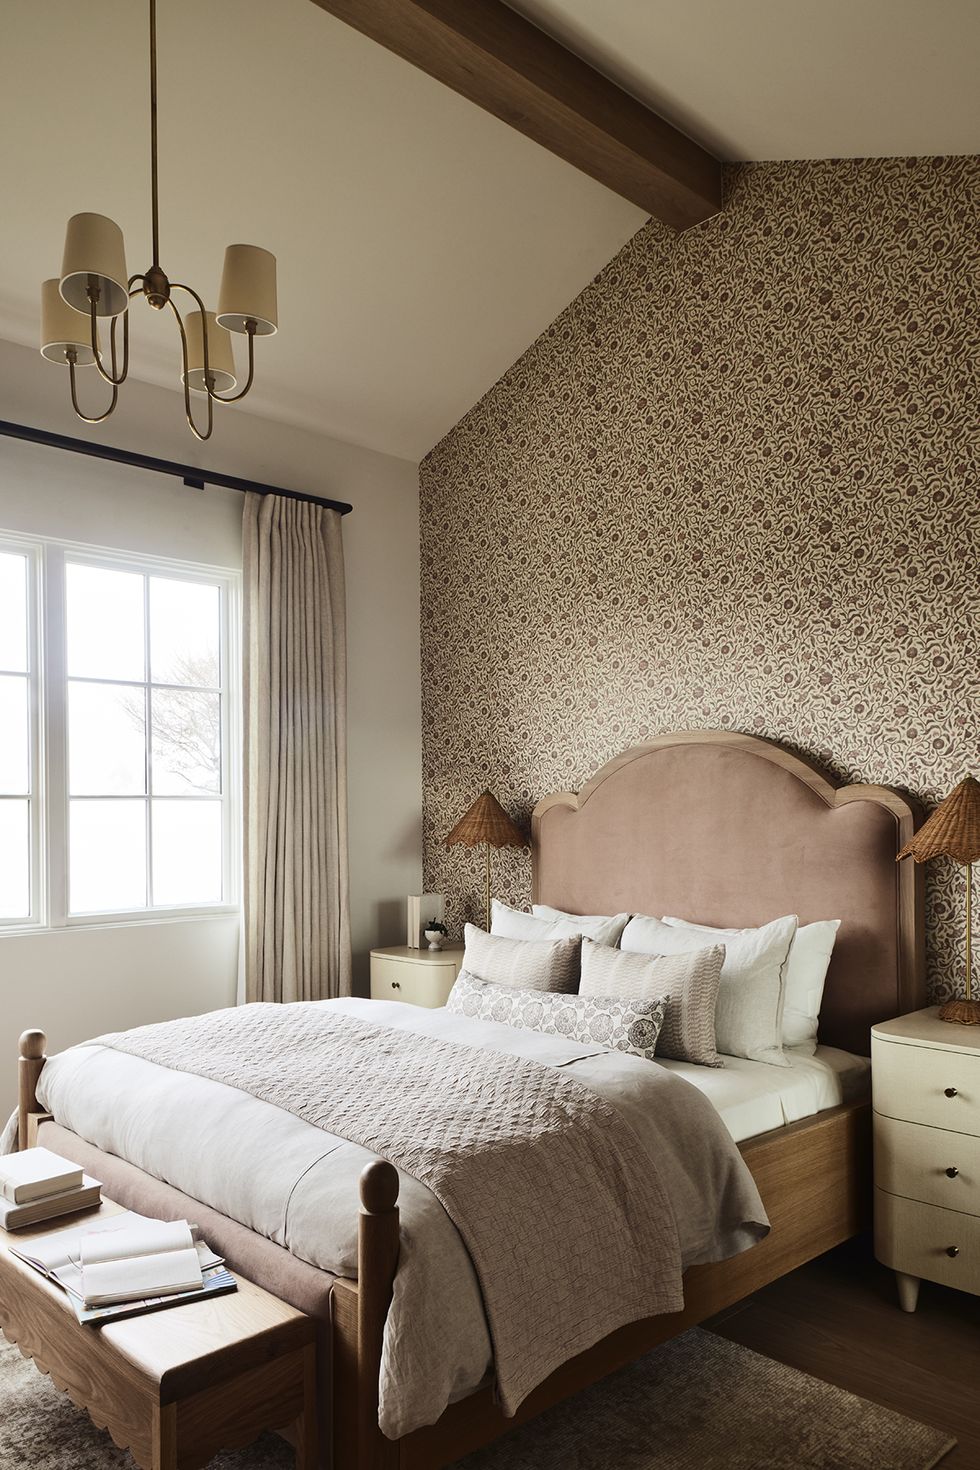 Bed with large headboard and floral accent wall